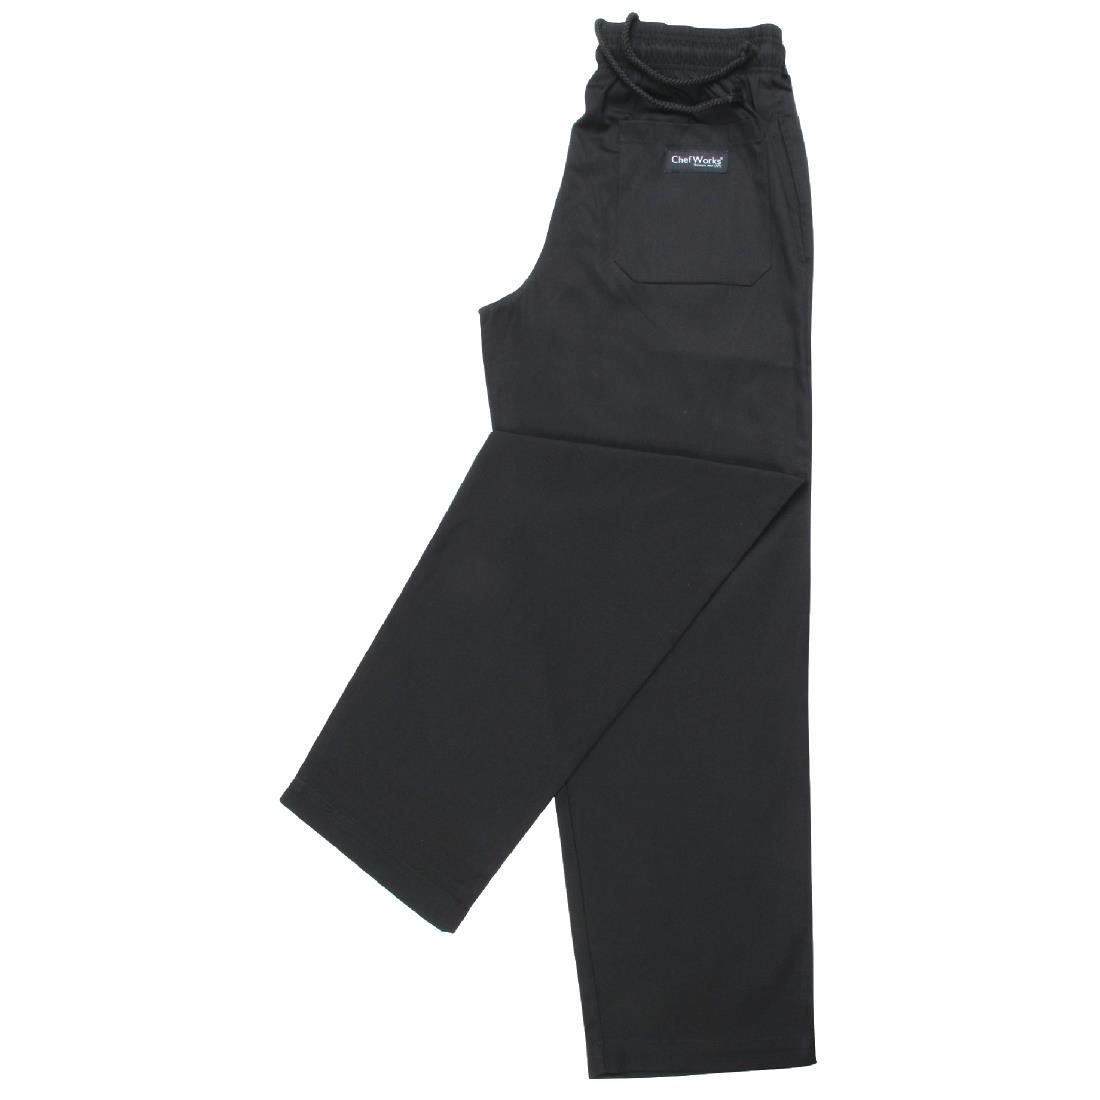 Chef Works Essential Baggy Trousers Black 4XL - A029-4XL  - 2